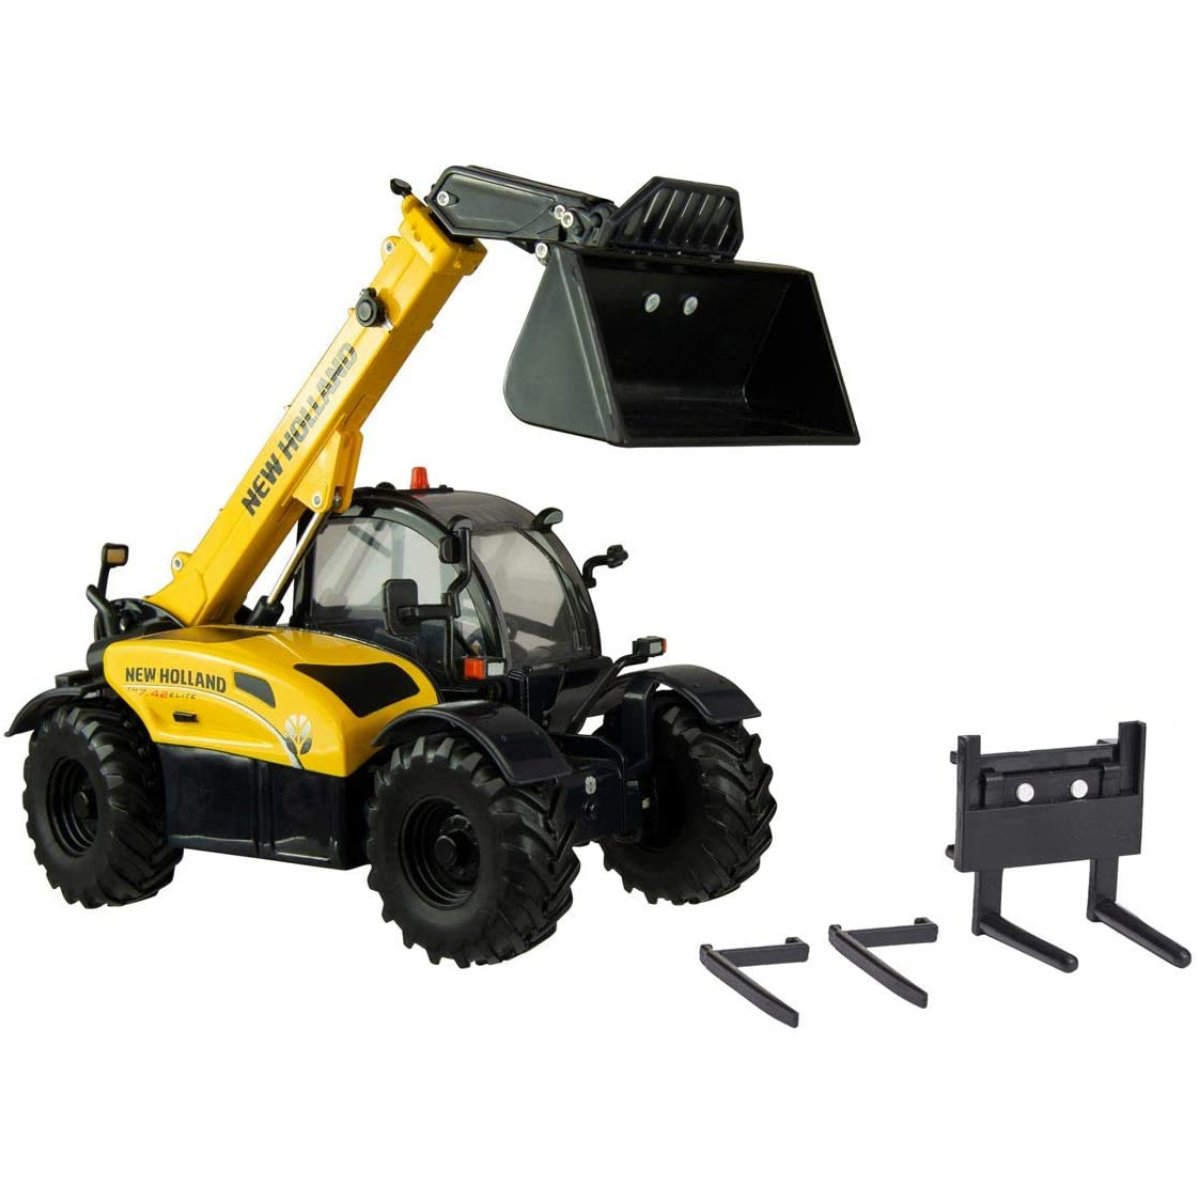 Britains New Holland TH 7.42 Telehandler - 1:32 Scale - Phillips Hobbies